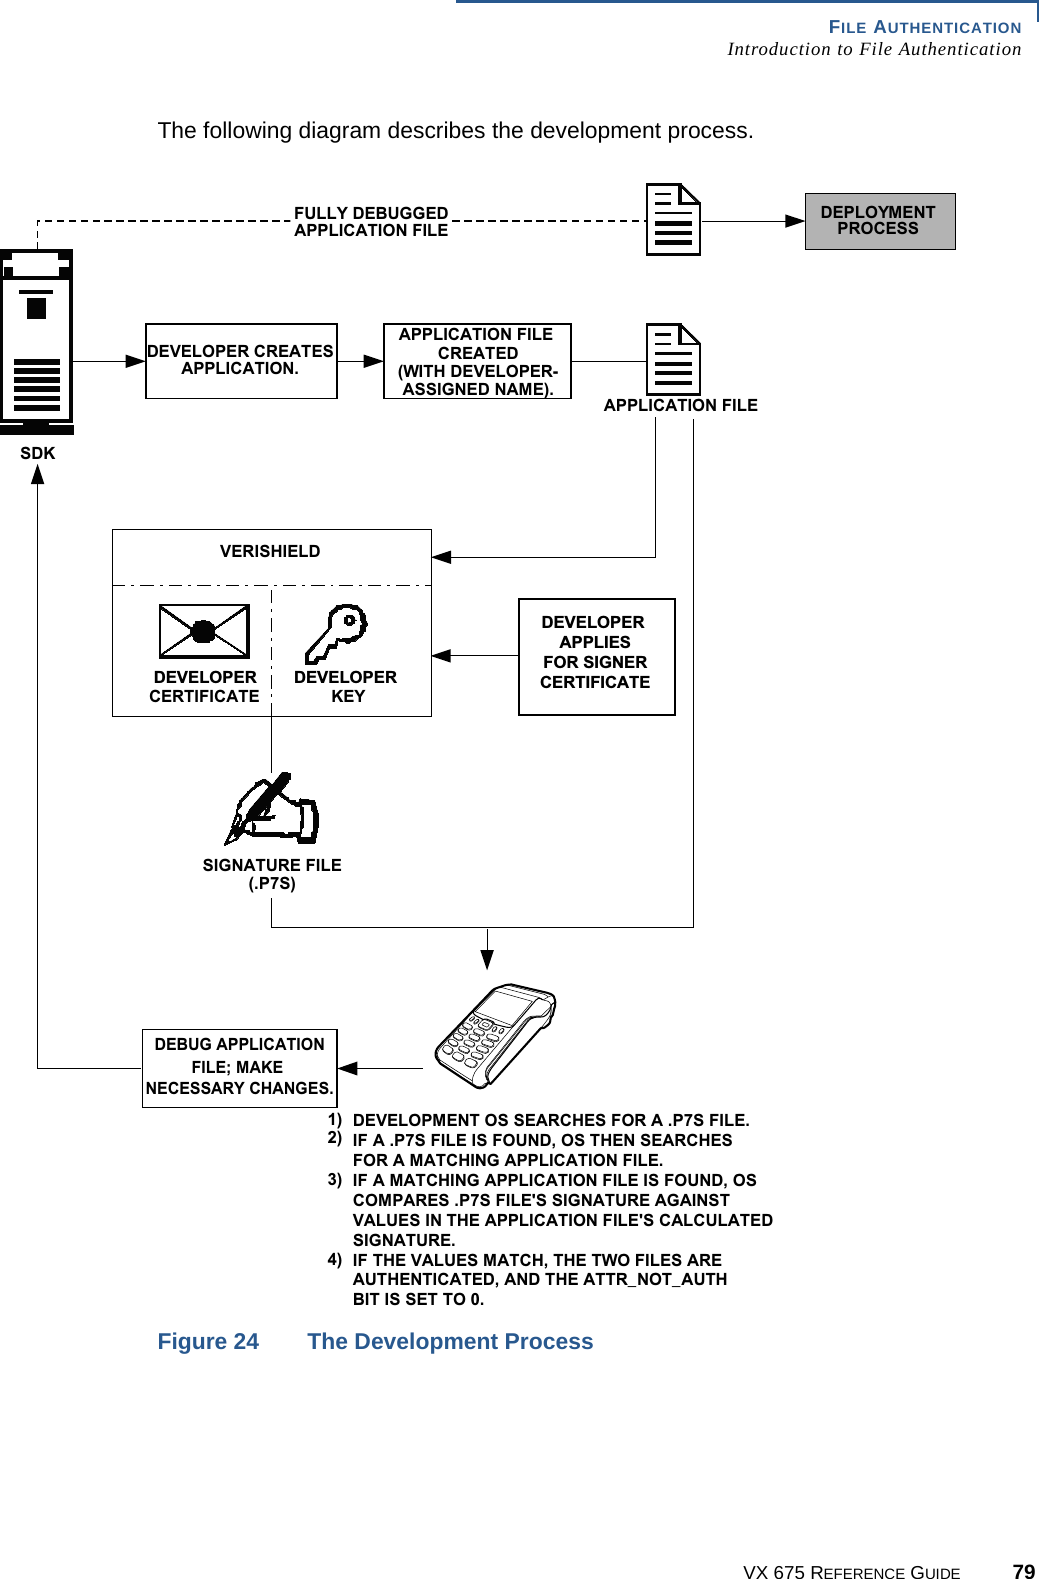 FILE AUTHENTICATIONIntroduction to File AuthenticationVX 675 REFERENCE GUIDE 79The following diagram describes the development process.Figure 24 The Development ProcessSIGNATURE FILE(.P7S)APPLICATION FILEDEVELOPMENT OS SEARCHES FOR A .P7S FILE.IF A .P7S FILE IS FOUND, OS THEN SEARCHESFOR A MATCHING APPLICATION FILE.IF A MATCHING APPLICATION FILE IS FOUND, OSCOMPARES .P7S FILE&apos;S SIGNATURE AGAINSTVALUES IN THE APPLICATION FILE&apos;S CALCULATEDSIGNATURE.IF THE VALUES MATCH, THE TWO FILES AREAUTHENTICATED, AND THE ATTR_NOT_AUTHBIT IS SET TO 0.1)2)3)4)SDK&apos;(9(/23(5 &apos;(9(/23(5&apos;(9(/23(5$33/,(6)256,*1(5&amp;(57,),&amp;$7(CERTIFICATEKEYVERISHIELDDEPLOYMENTPROCESSFULLY DEBUGGEDAPPLICATION FILEDEBUG APPLICATIONFILE; MAKENECESSARY CHANGES.DEVELOPER CREATESAPPLICATION.APPLICATION FILECREATED(WITH DEVELOPER-ASSIGNED NAME).